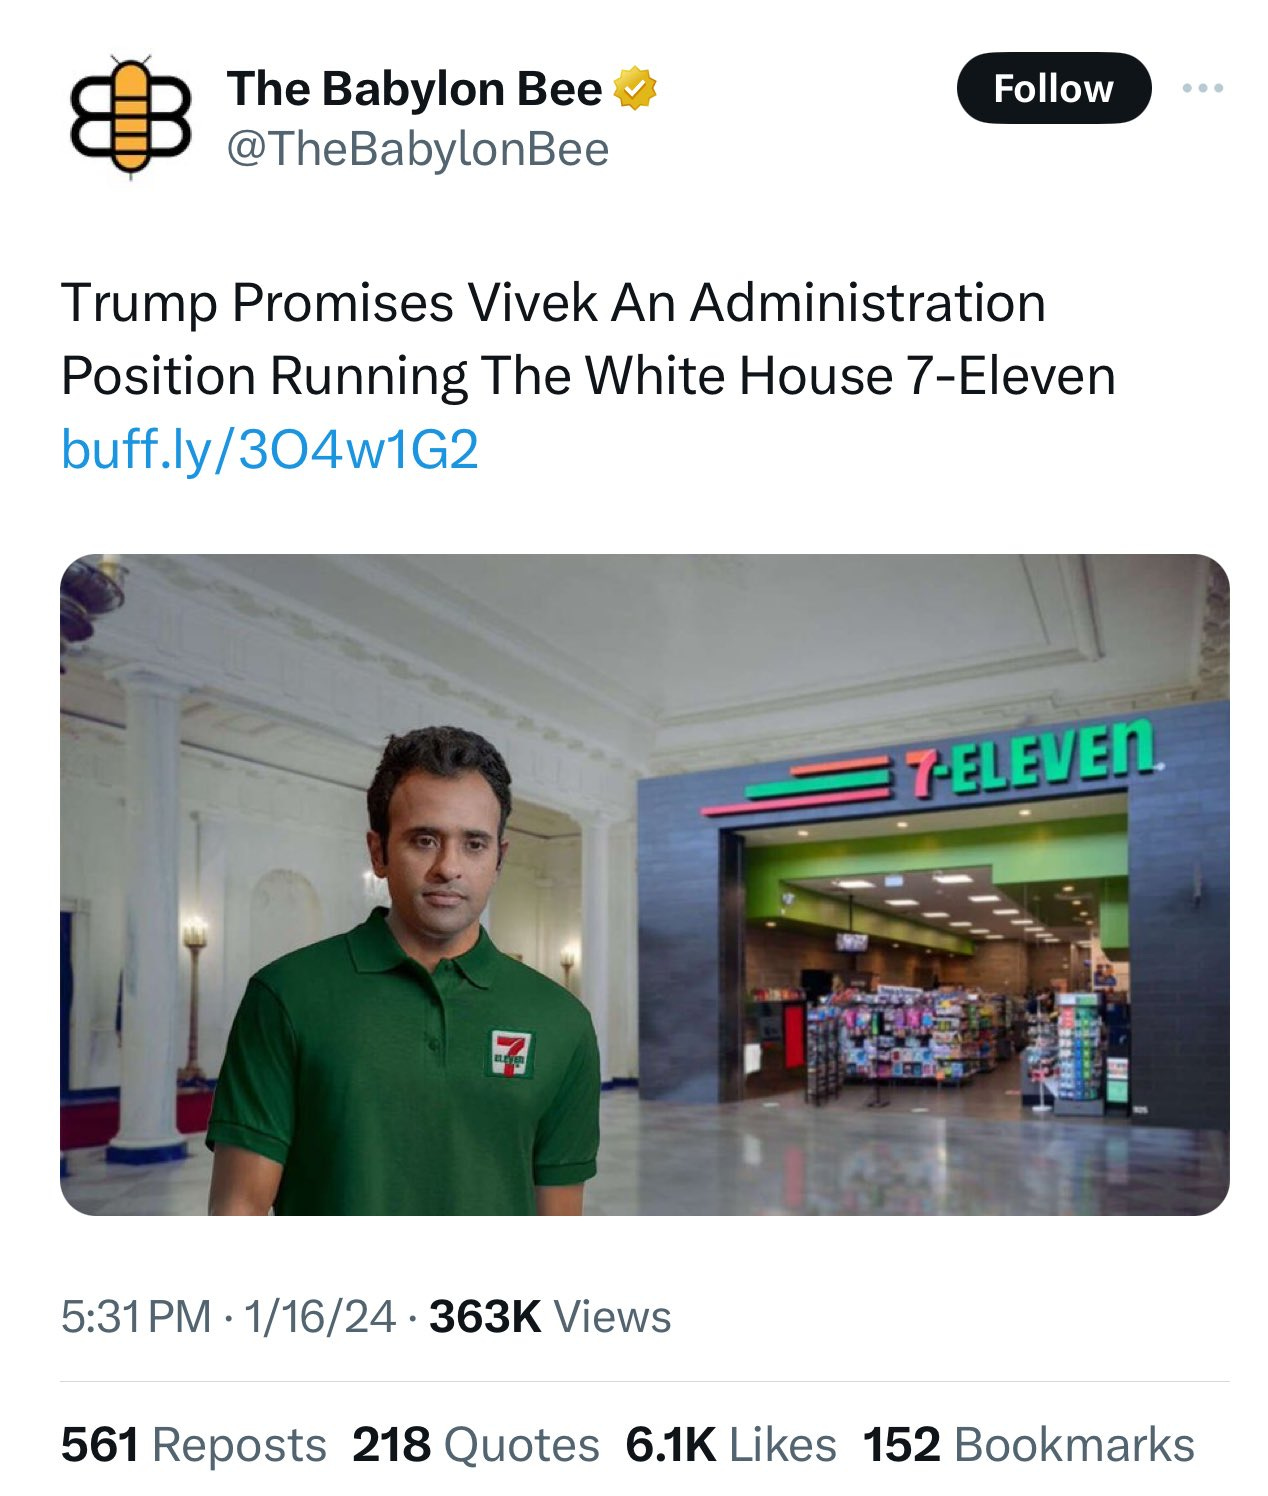 Trump Promises Vivek An Administration Position Running The White House 7-Eleven